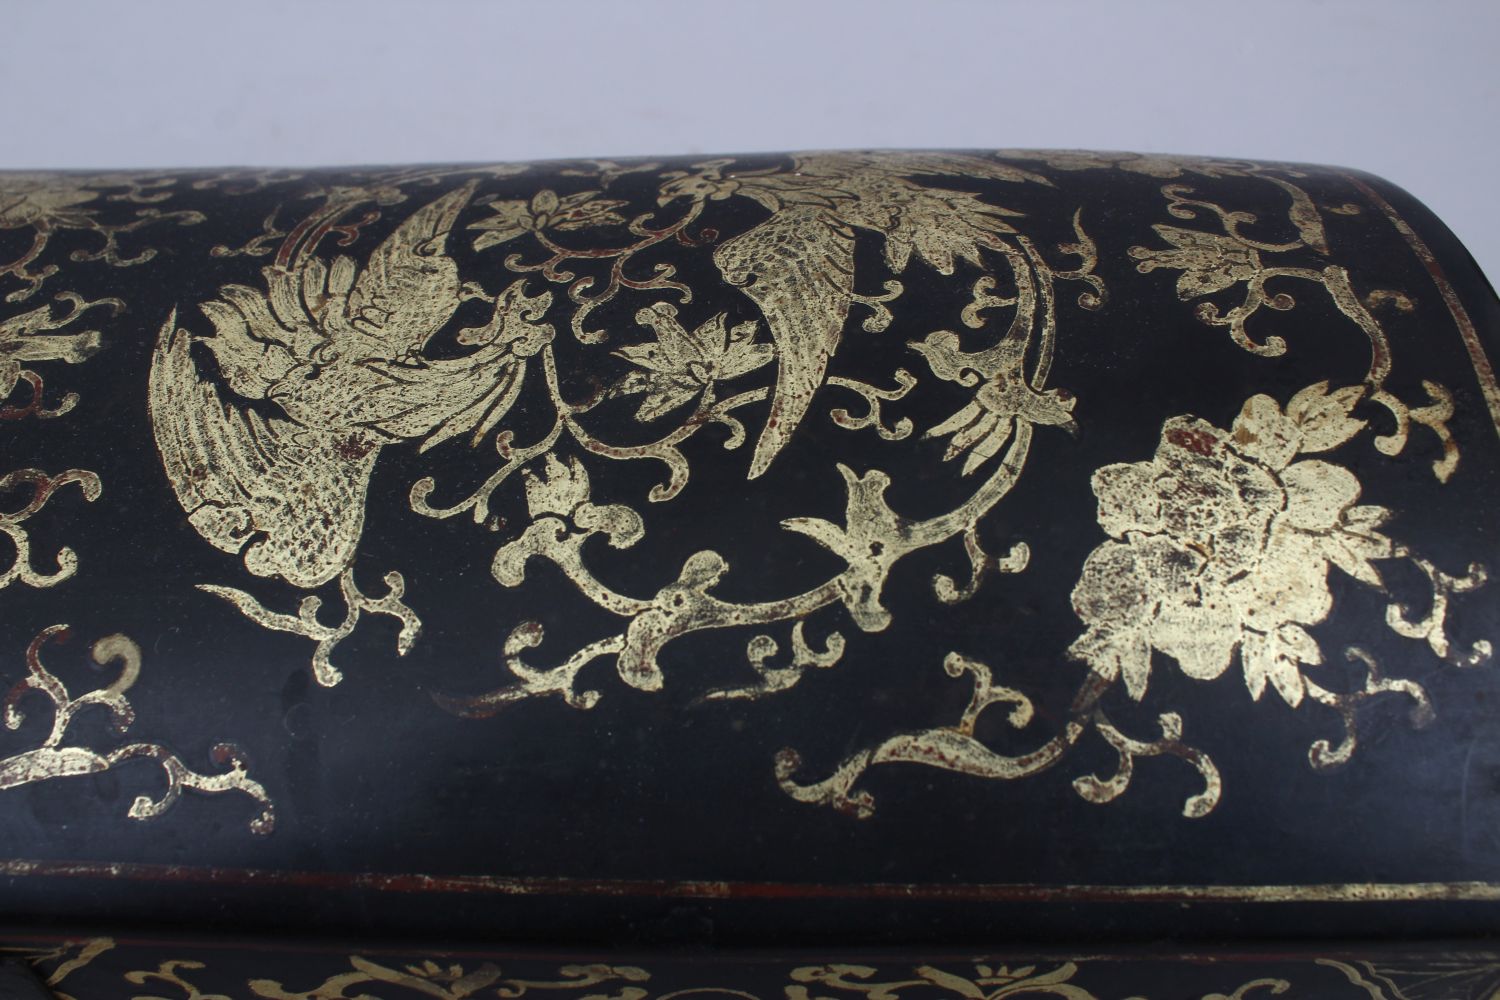 A GOOD 19TH CENTURY CHINESE LACQUER CHEST / BOX, the lacquer box with gilded decoration of dragons - Image 8 of 12